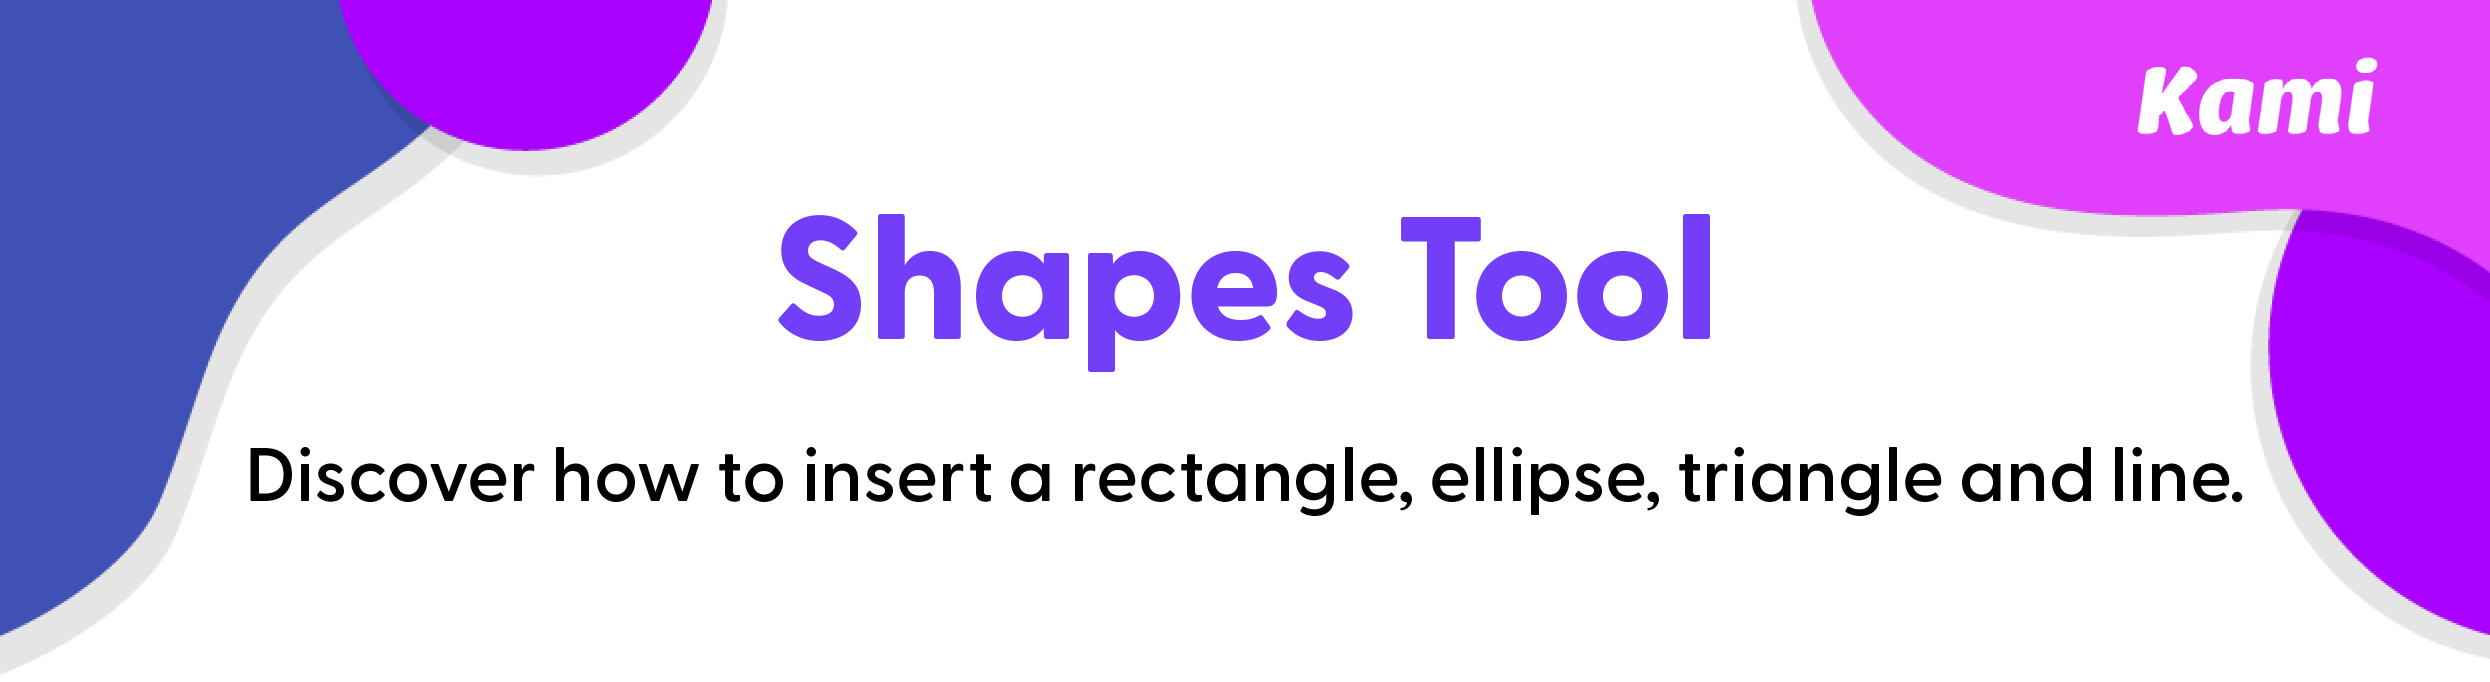 Shapes tool preview 1